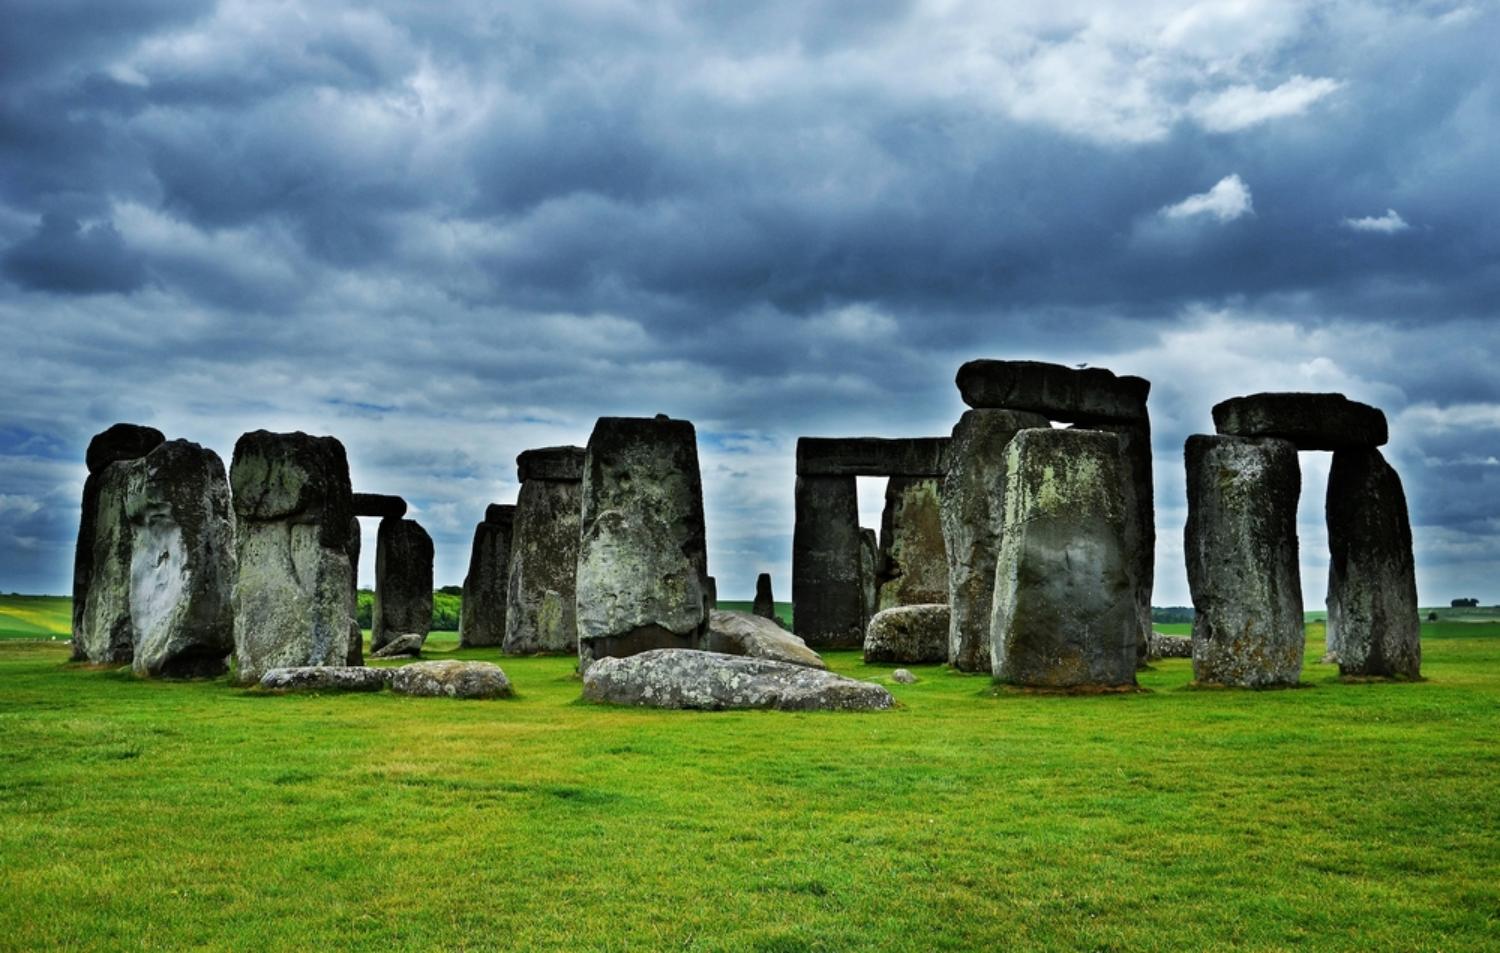 Afternoon Trip to Stonehenge – Leaving from London